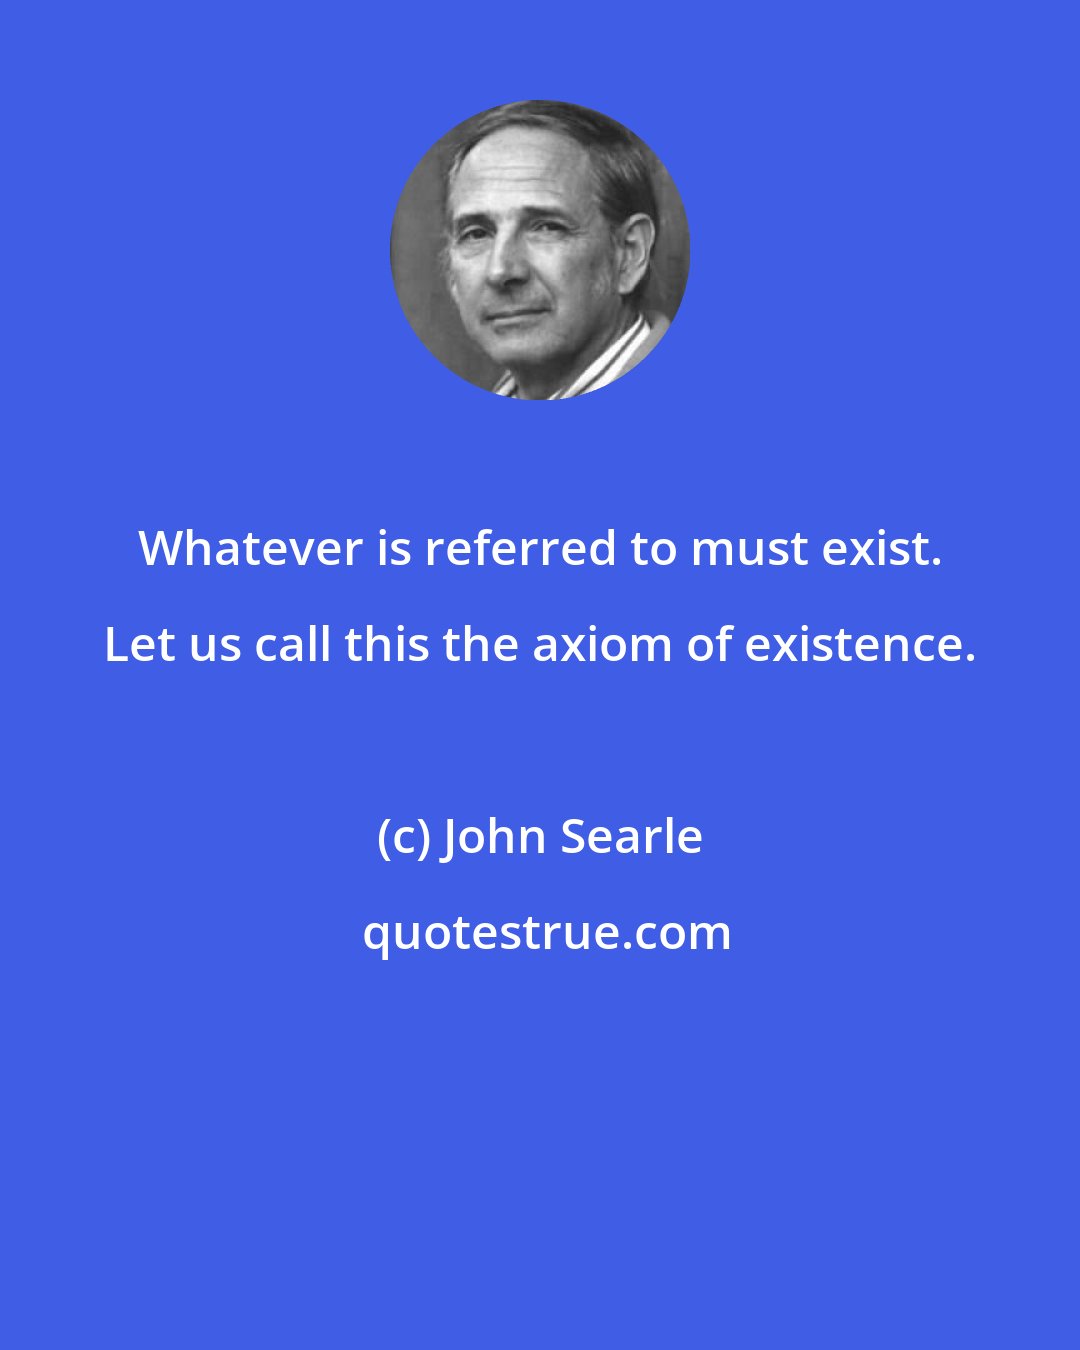 John Searle: Whatever is referred to must exist. Let us call this the axiom of existence.